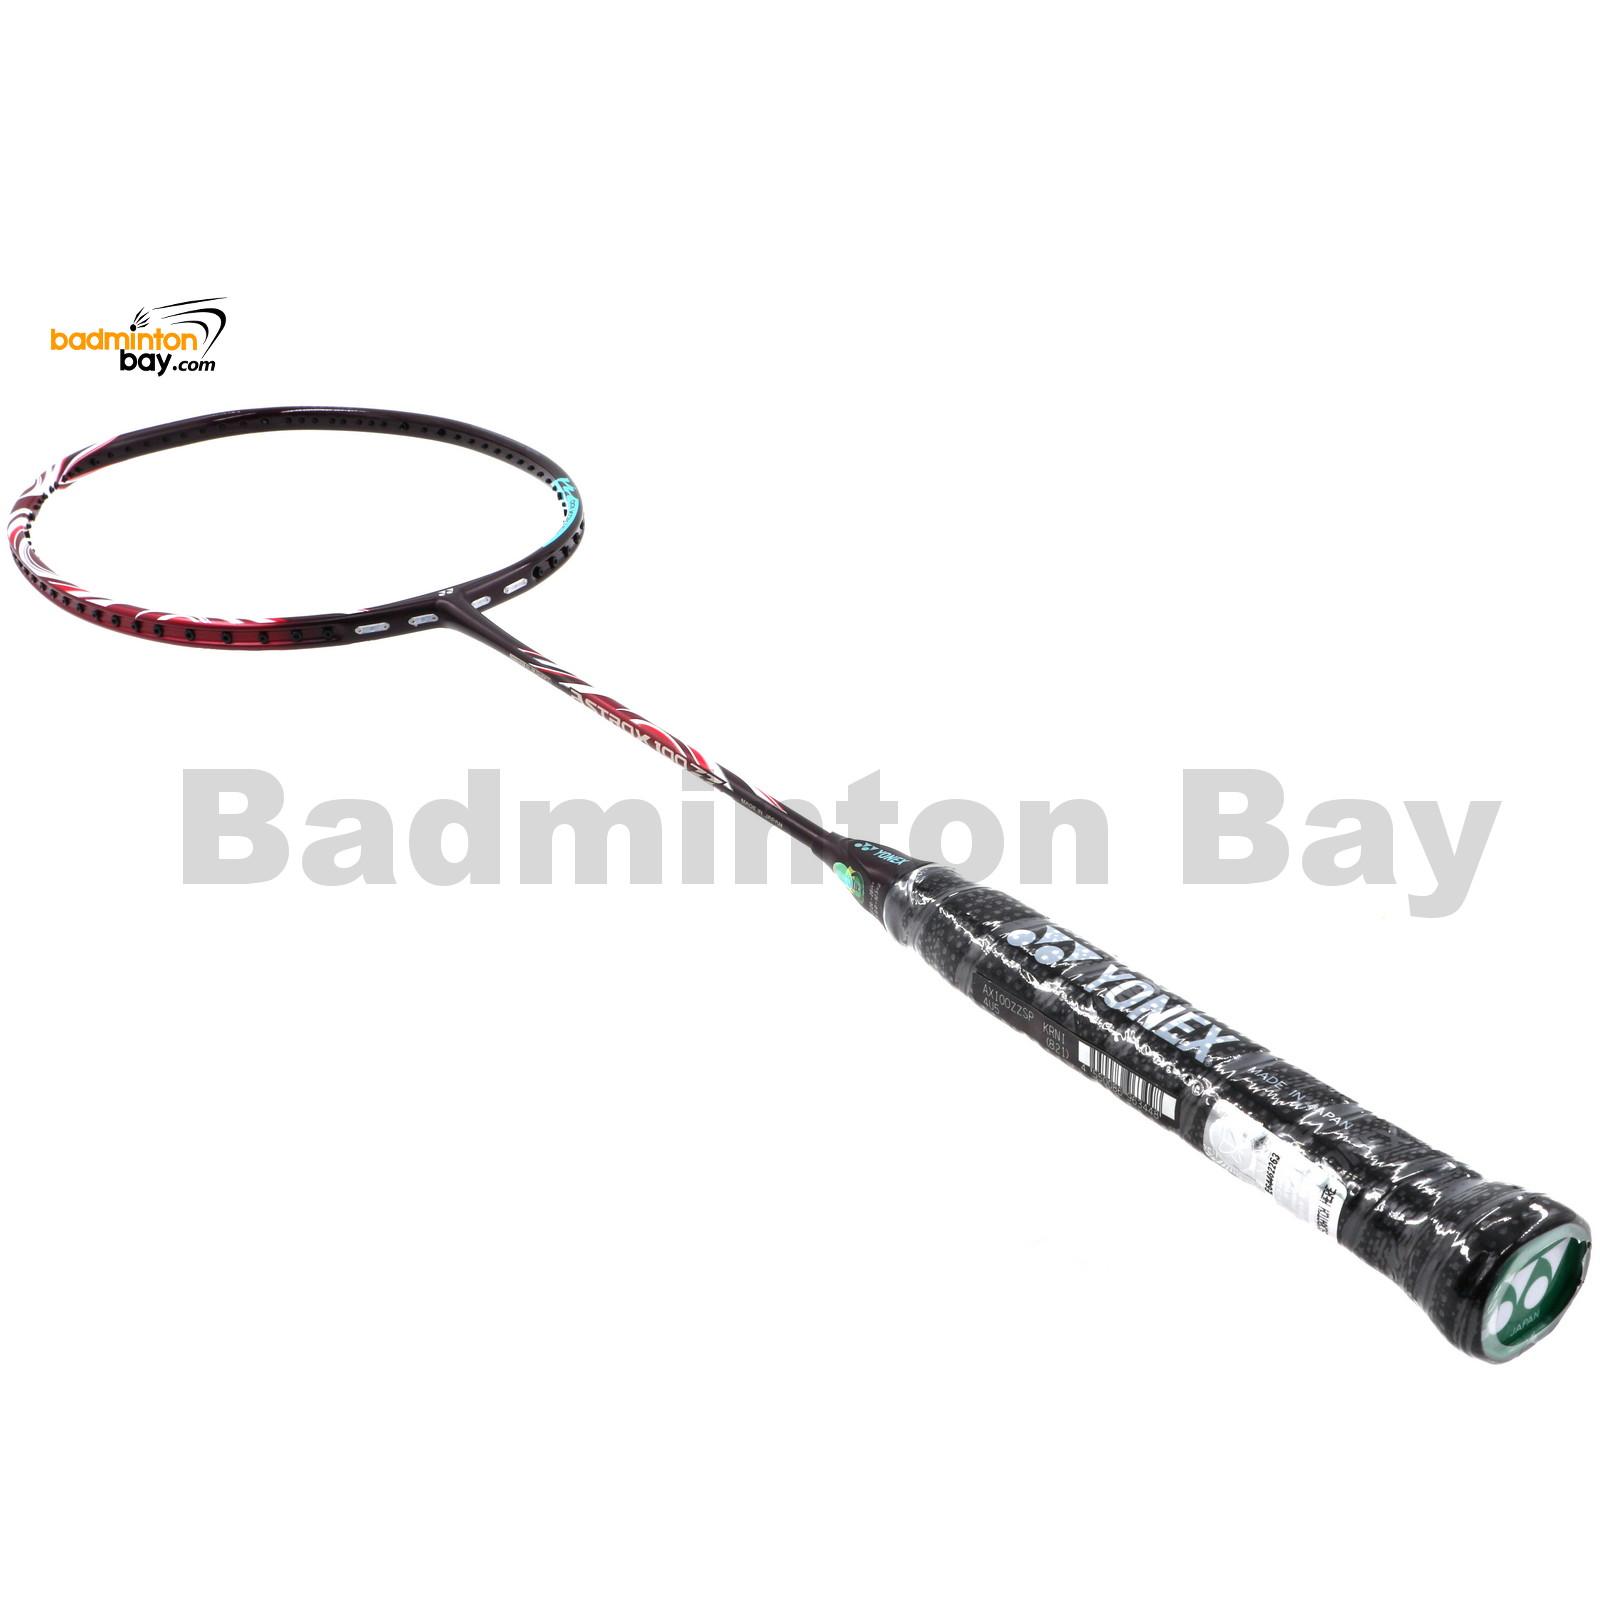 Details about   New Yonex Astrox 100ZZ AX100ZZ Badminton Racket 4UG5 Made in Japan Free Shipping 